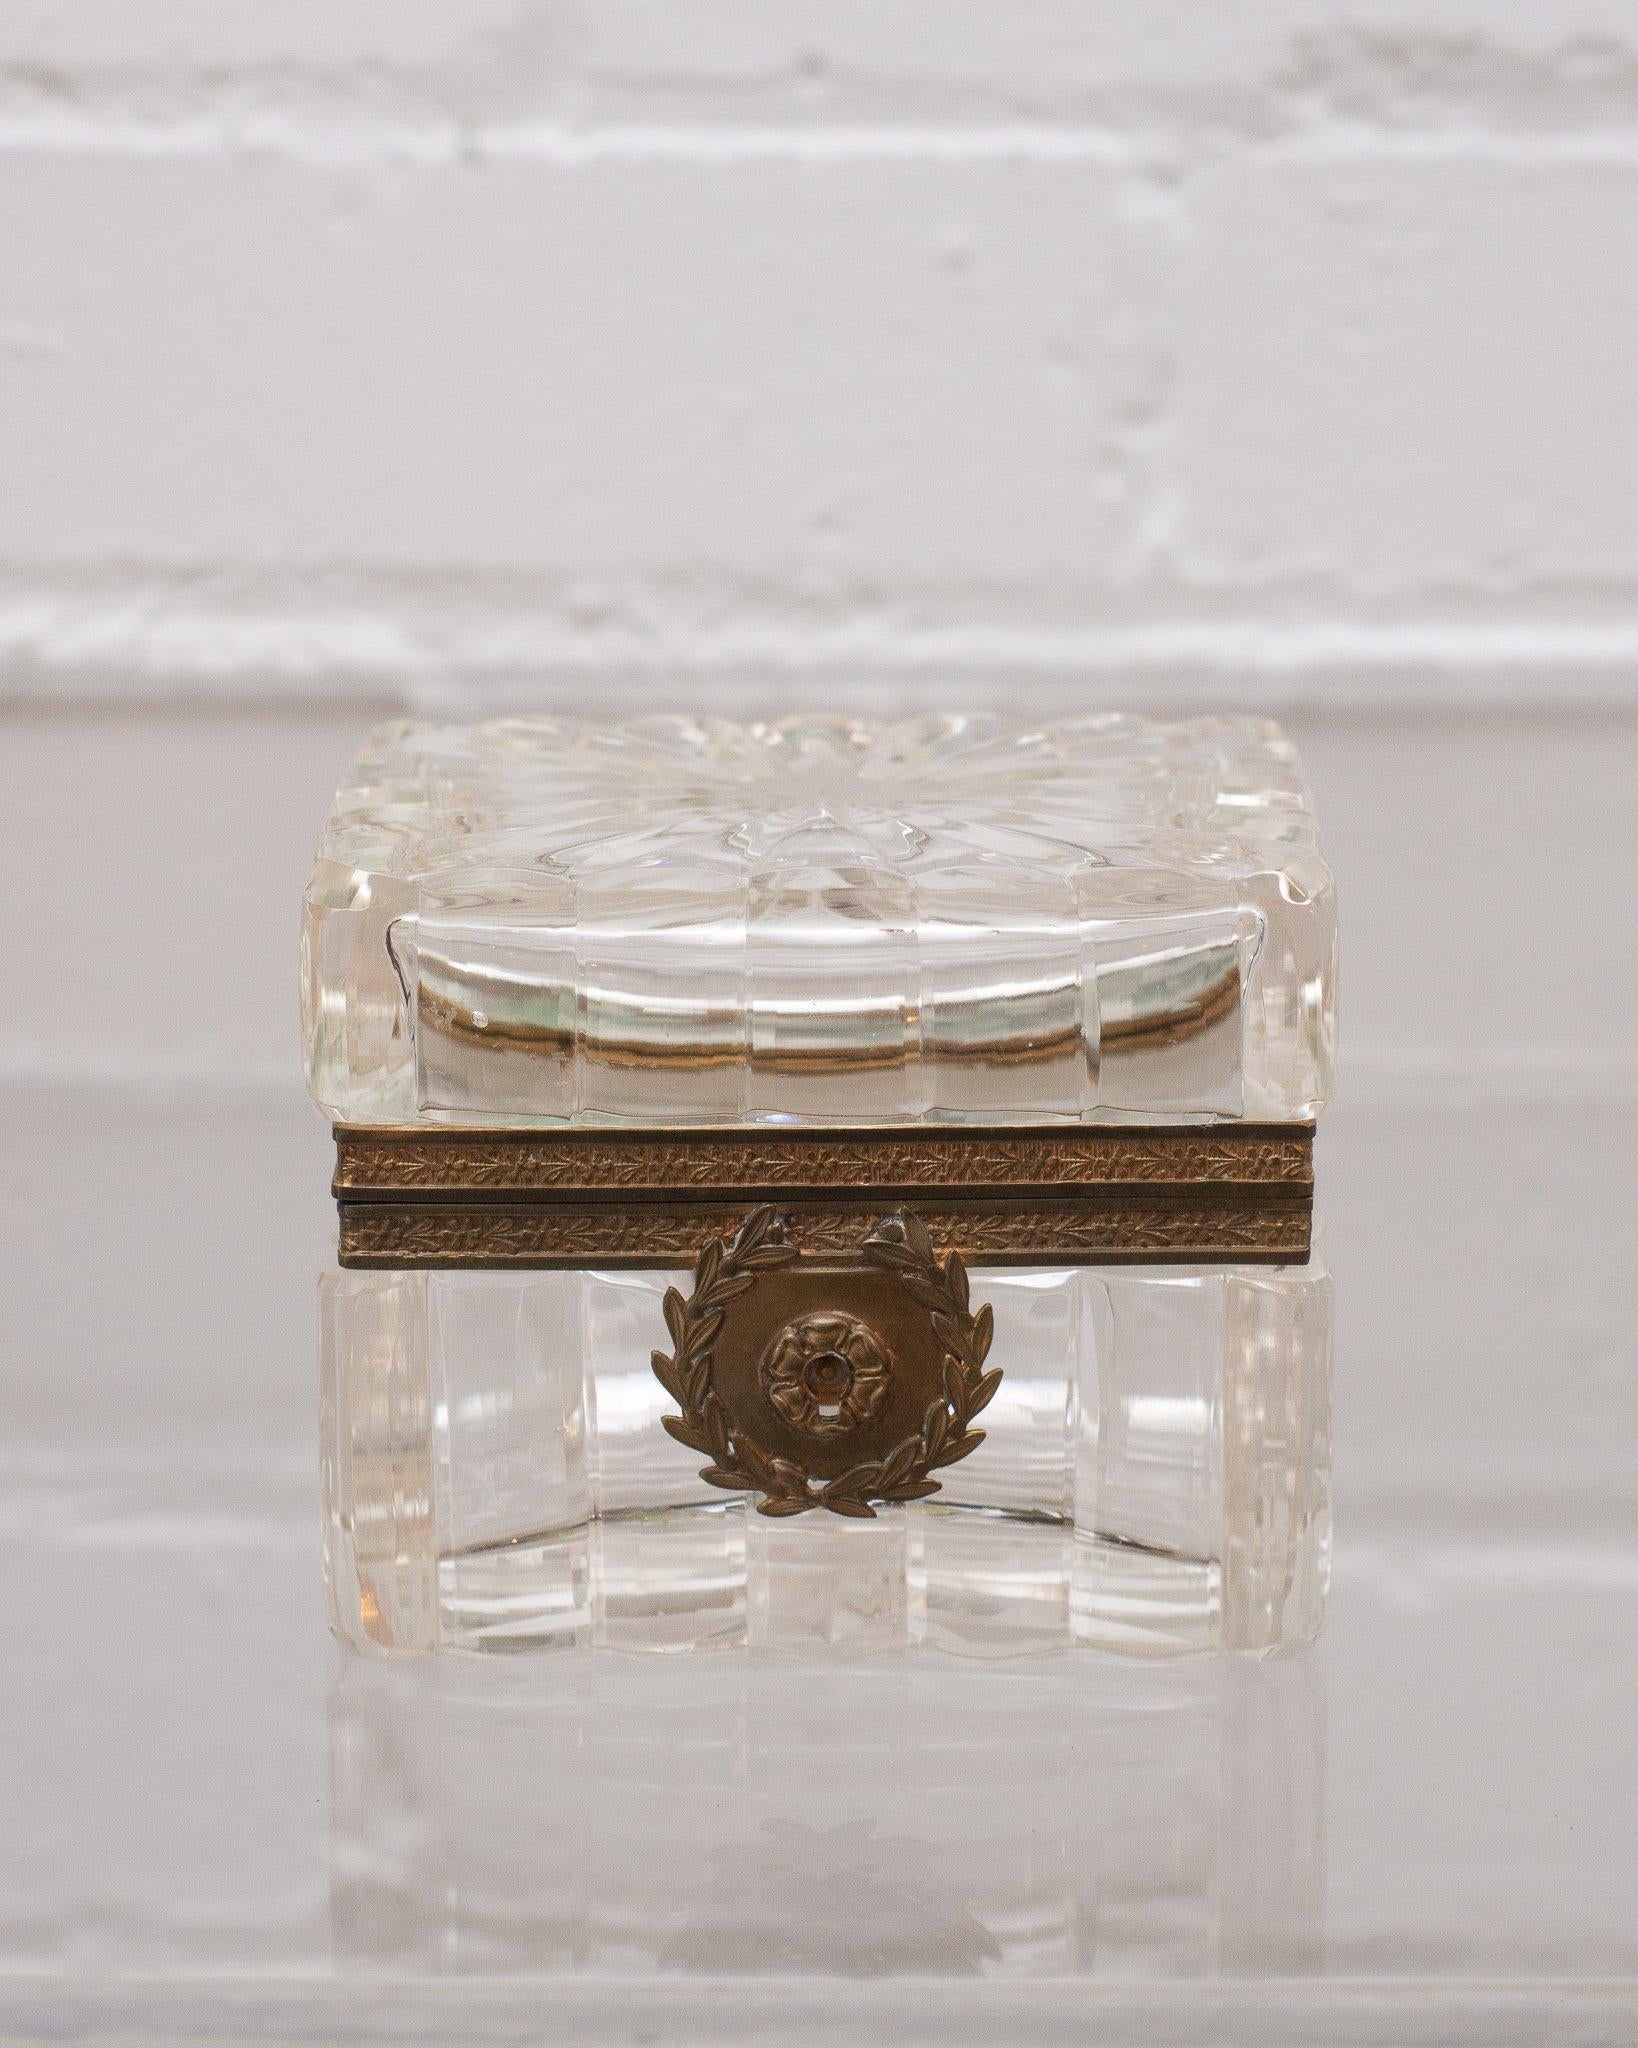 This antique crystal and bronze box makes a statement in any space. An early 1900s French production, this piece transitions from modern to classic interiors seamlessly with its sophisticated shape and light catching quality.